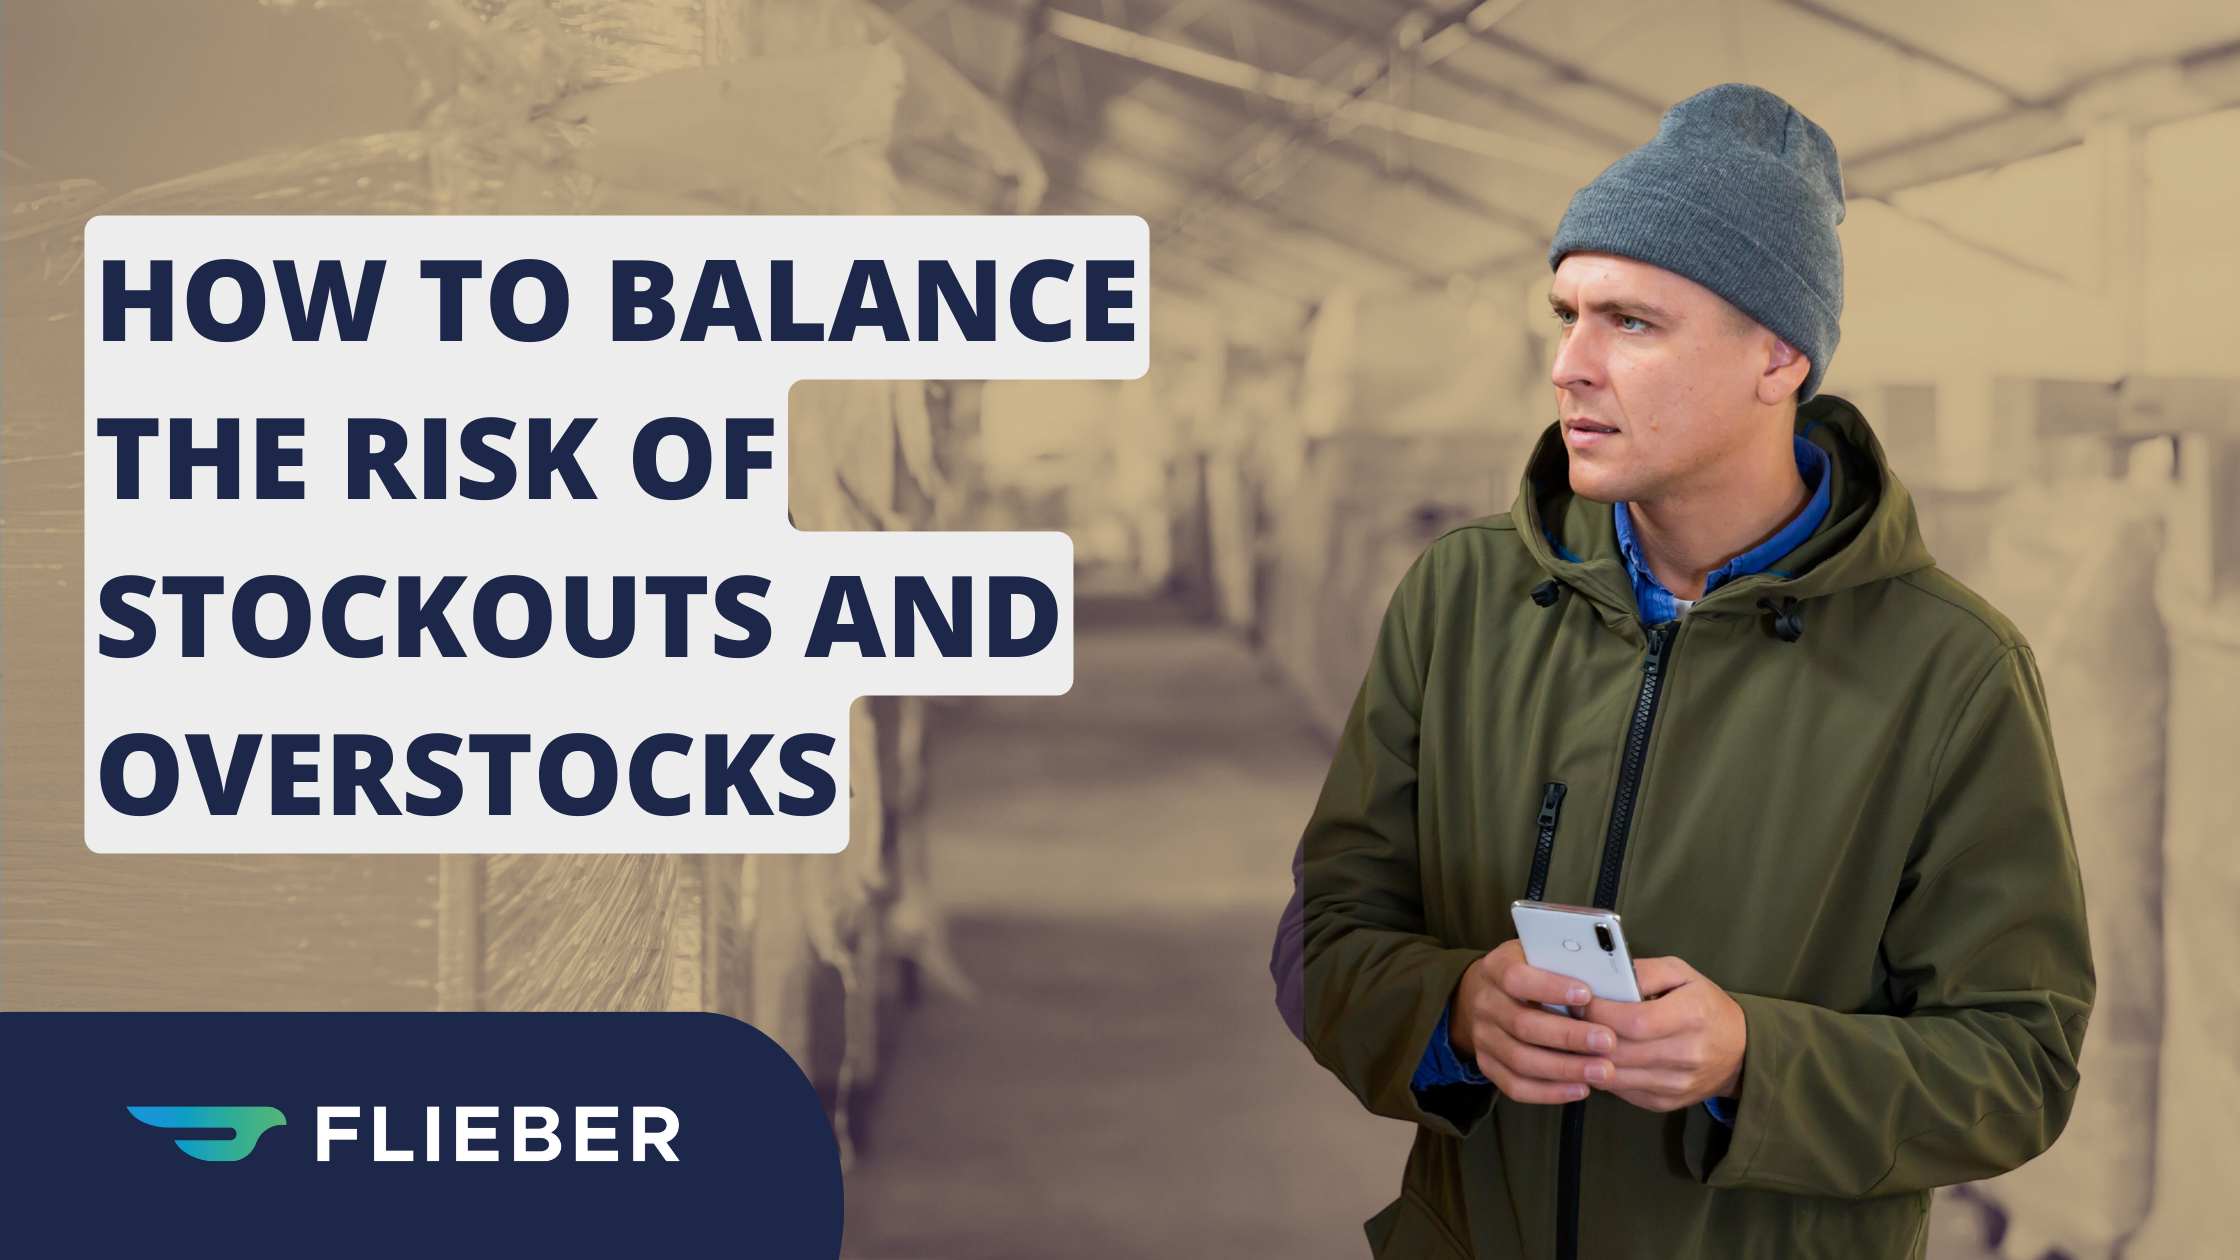 How to Balance the Risk of Stockouts vs. Overstocks